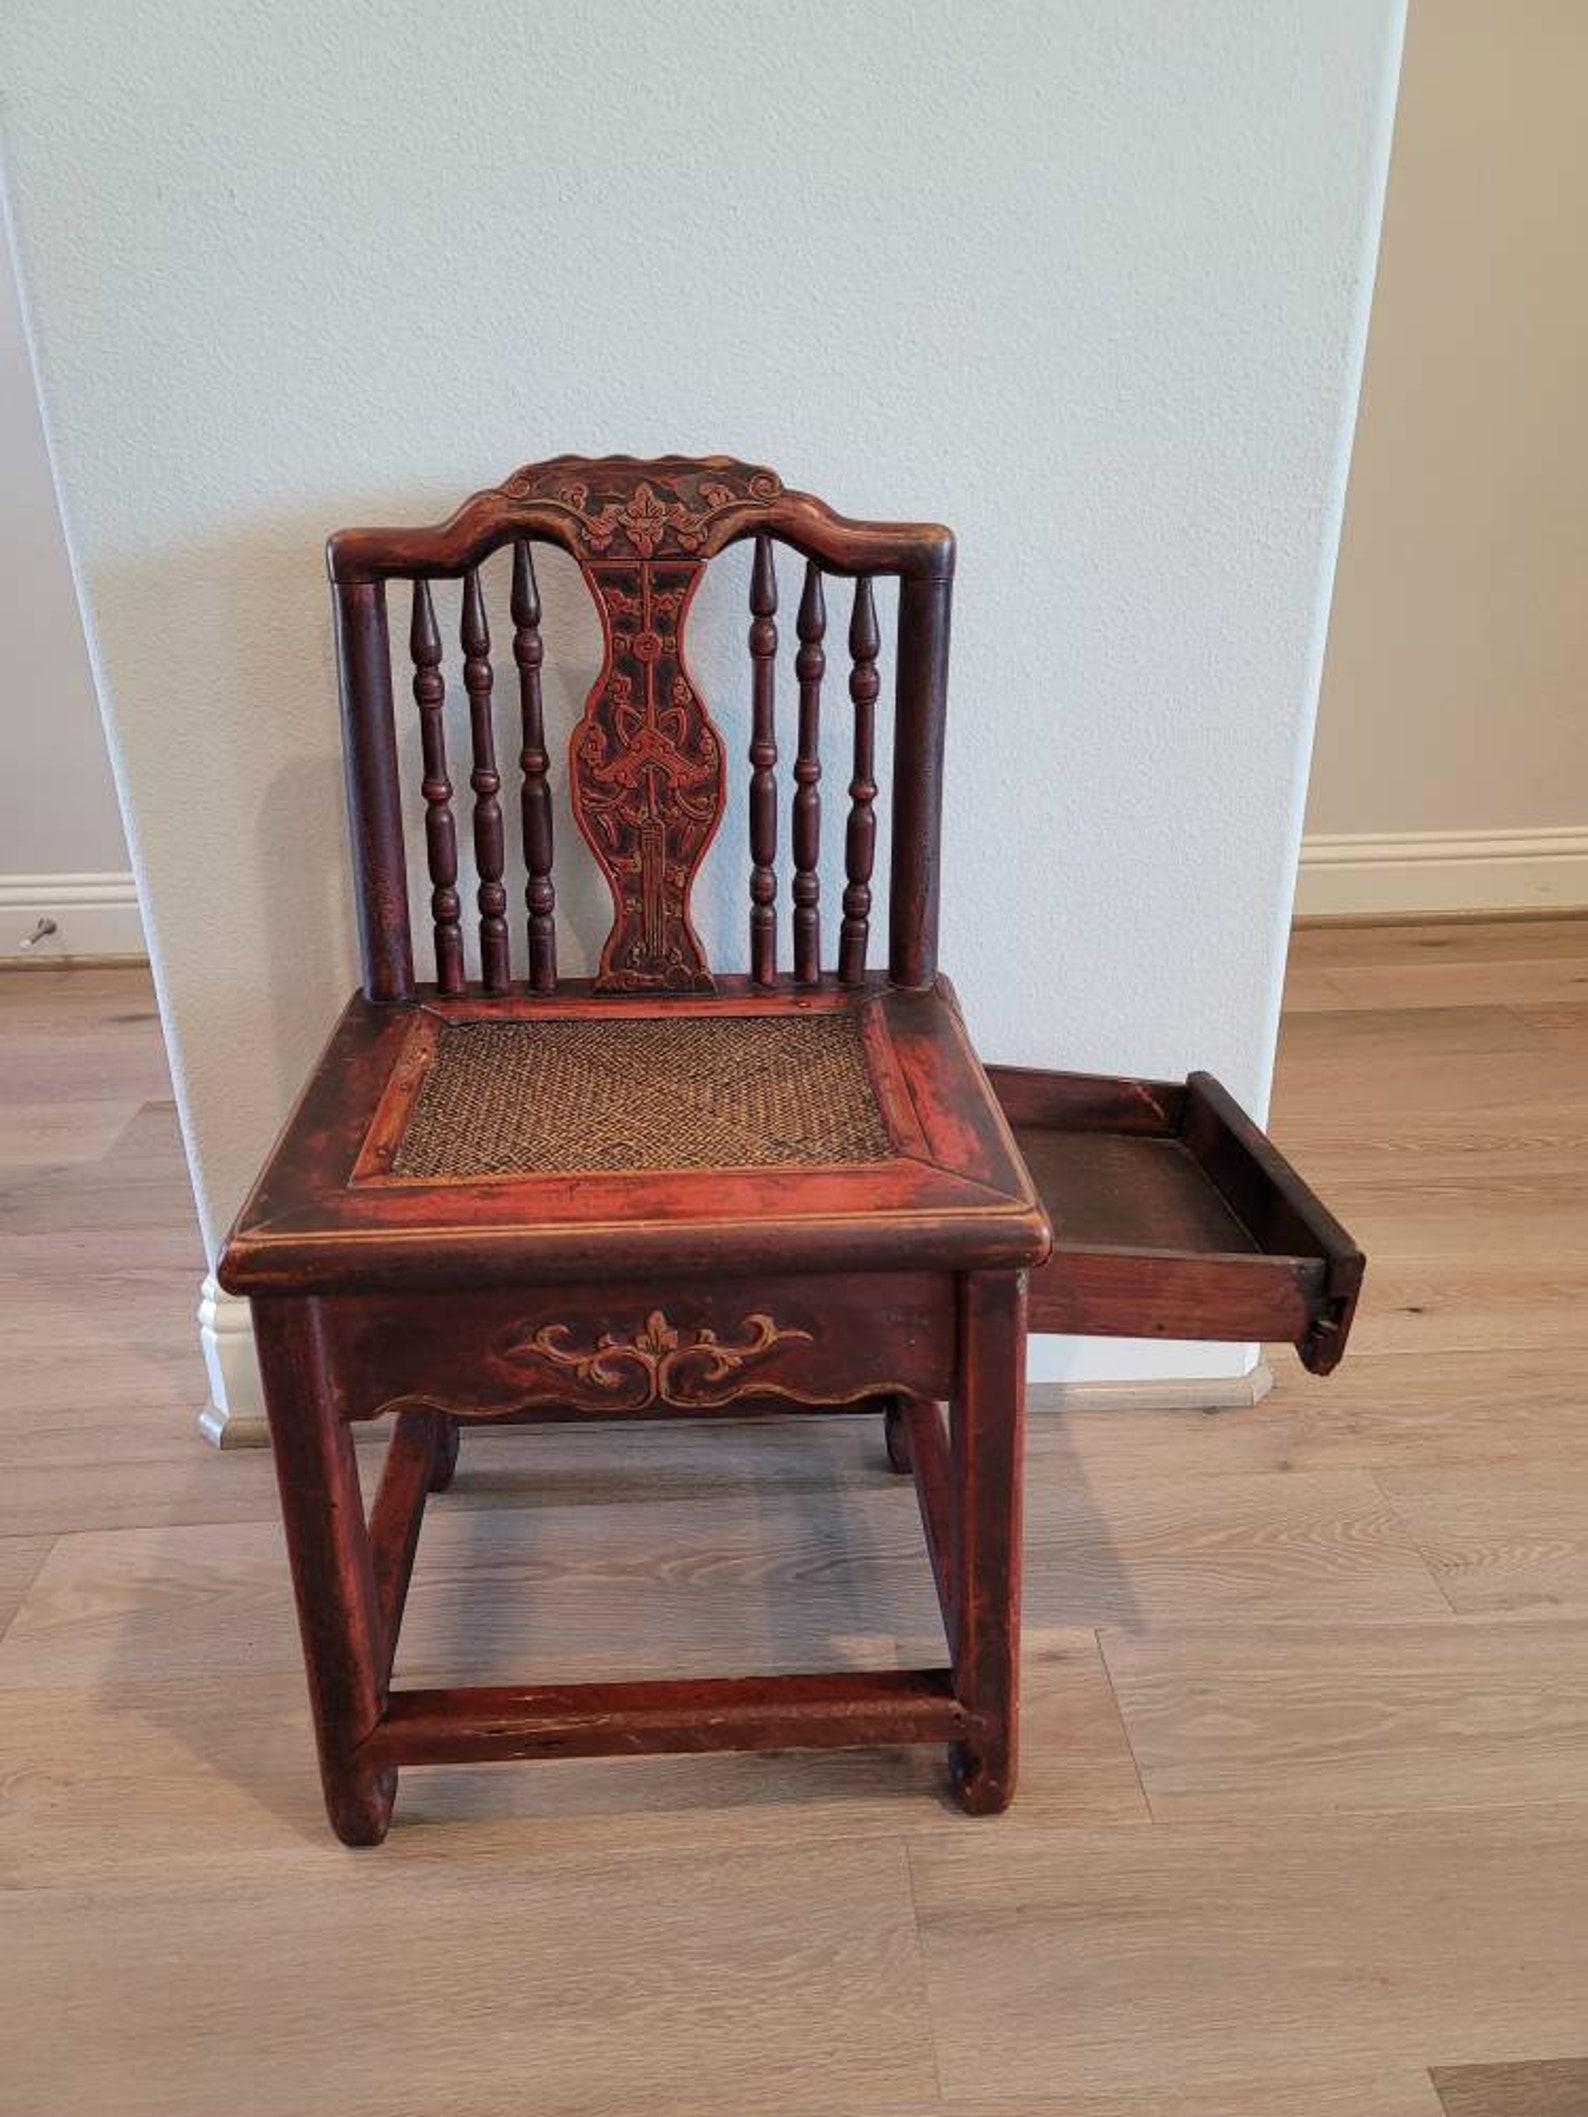 A Qing dynasty (1644–1912) Chinese ox blood red lacquered parcel gilt carved Hongmu wood wedding chair.

Unusual form featuring a concealed storage drawer and diminutive low chair size. 

Hand-crafted in China the 19th century, having a carved